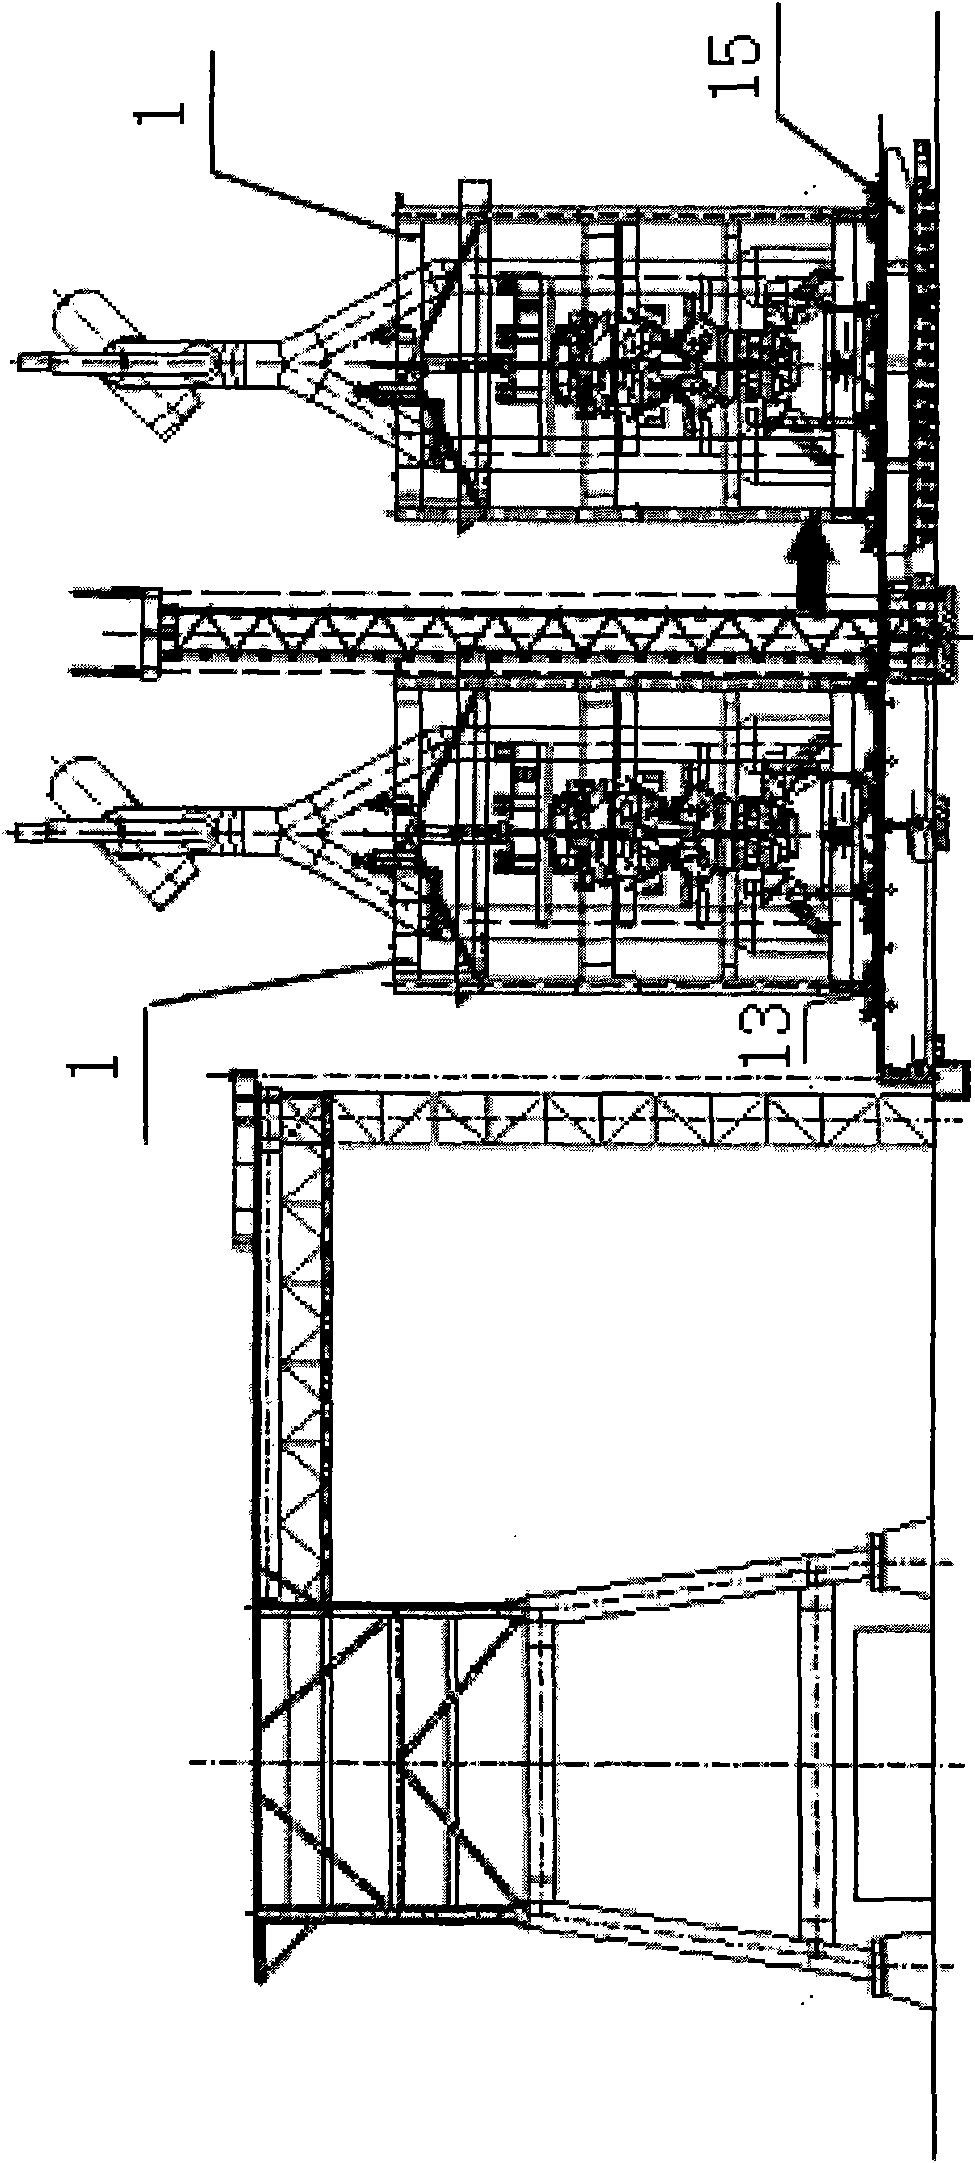 Modularized and integrative disassembling and installing methods for blast furnace